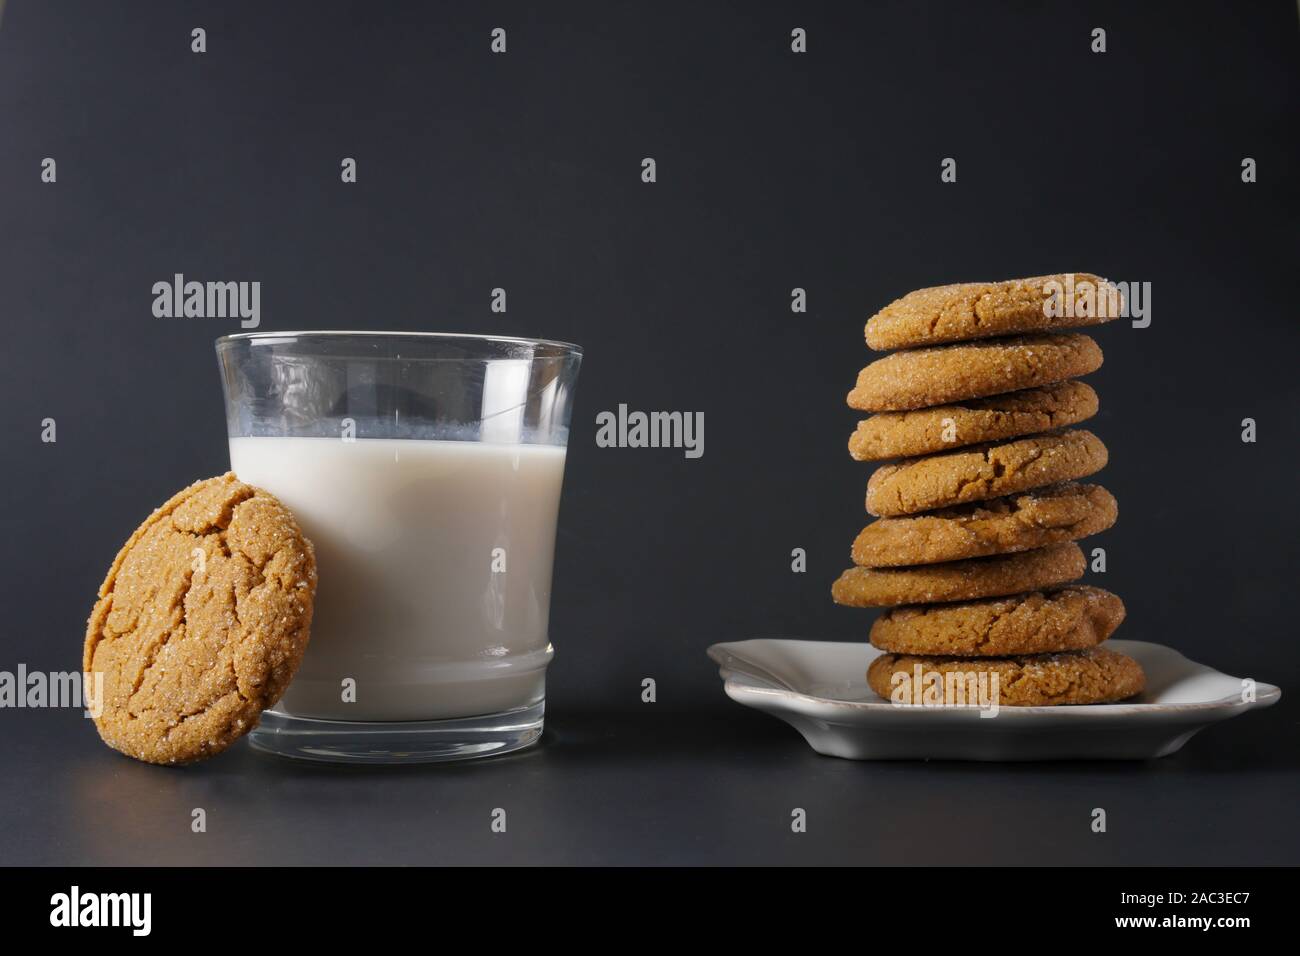 A ginger cookie rests on a glass of milk next to a stack of ginger cookies on a white plate and a black background; copy space Stock Photo